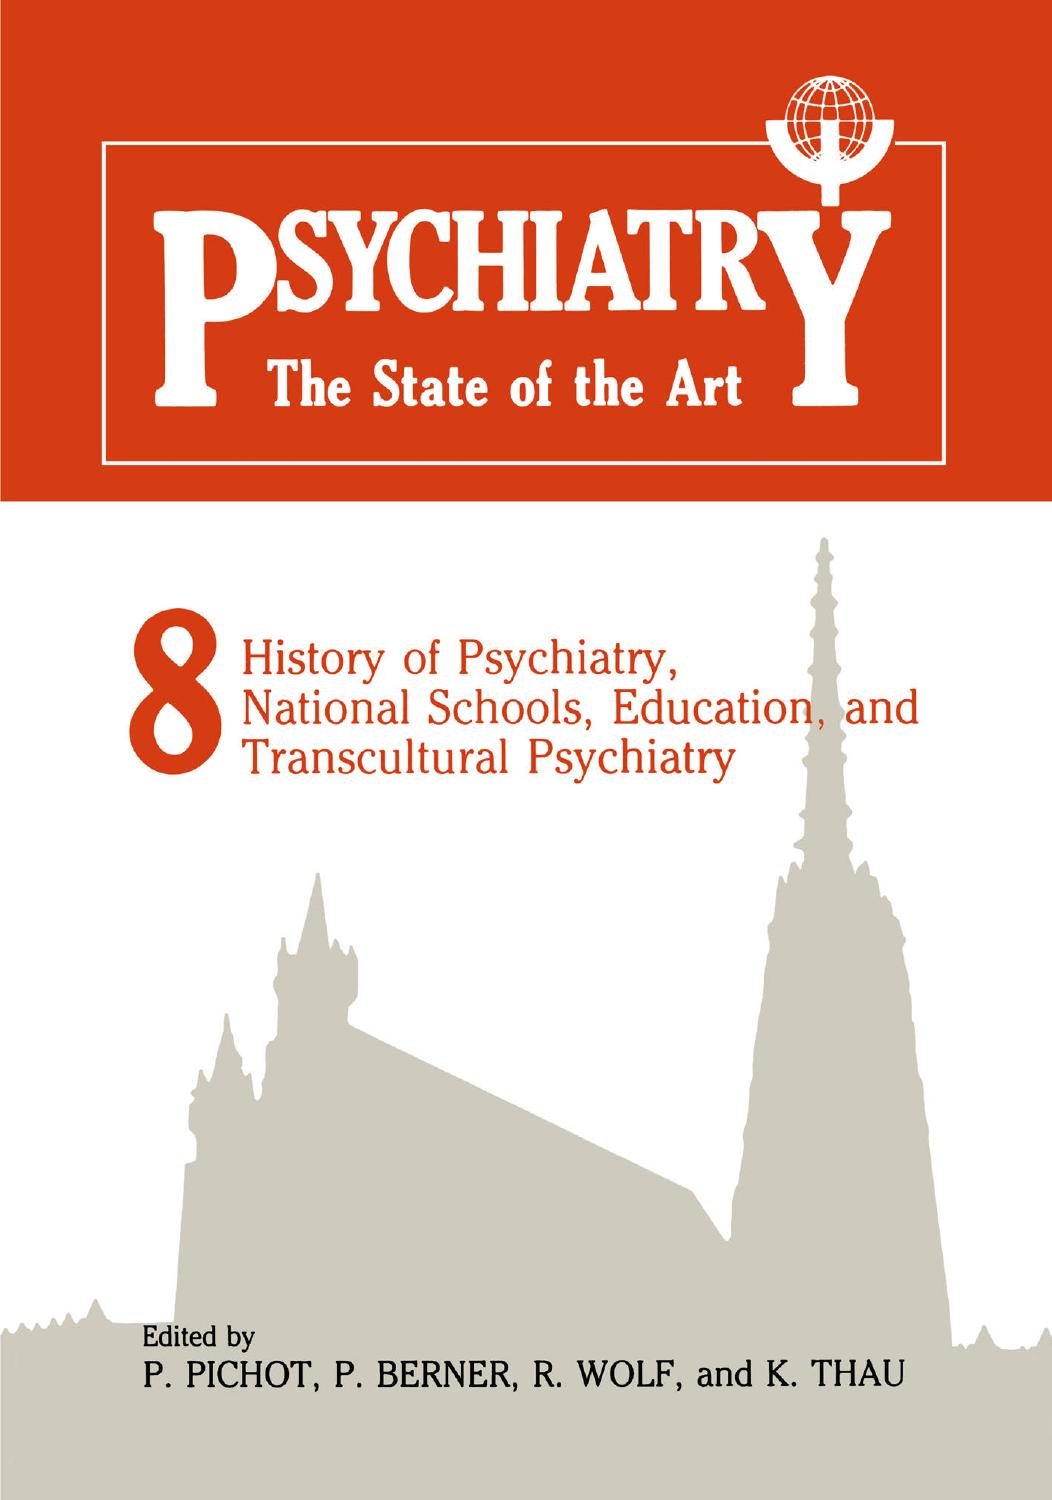 Psychiatry The State of the Art  Volume 8 History of Psychiatry, National Schools, Education, and Transcultural Psychiatry Vol 8